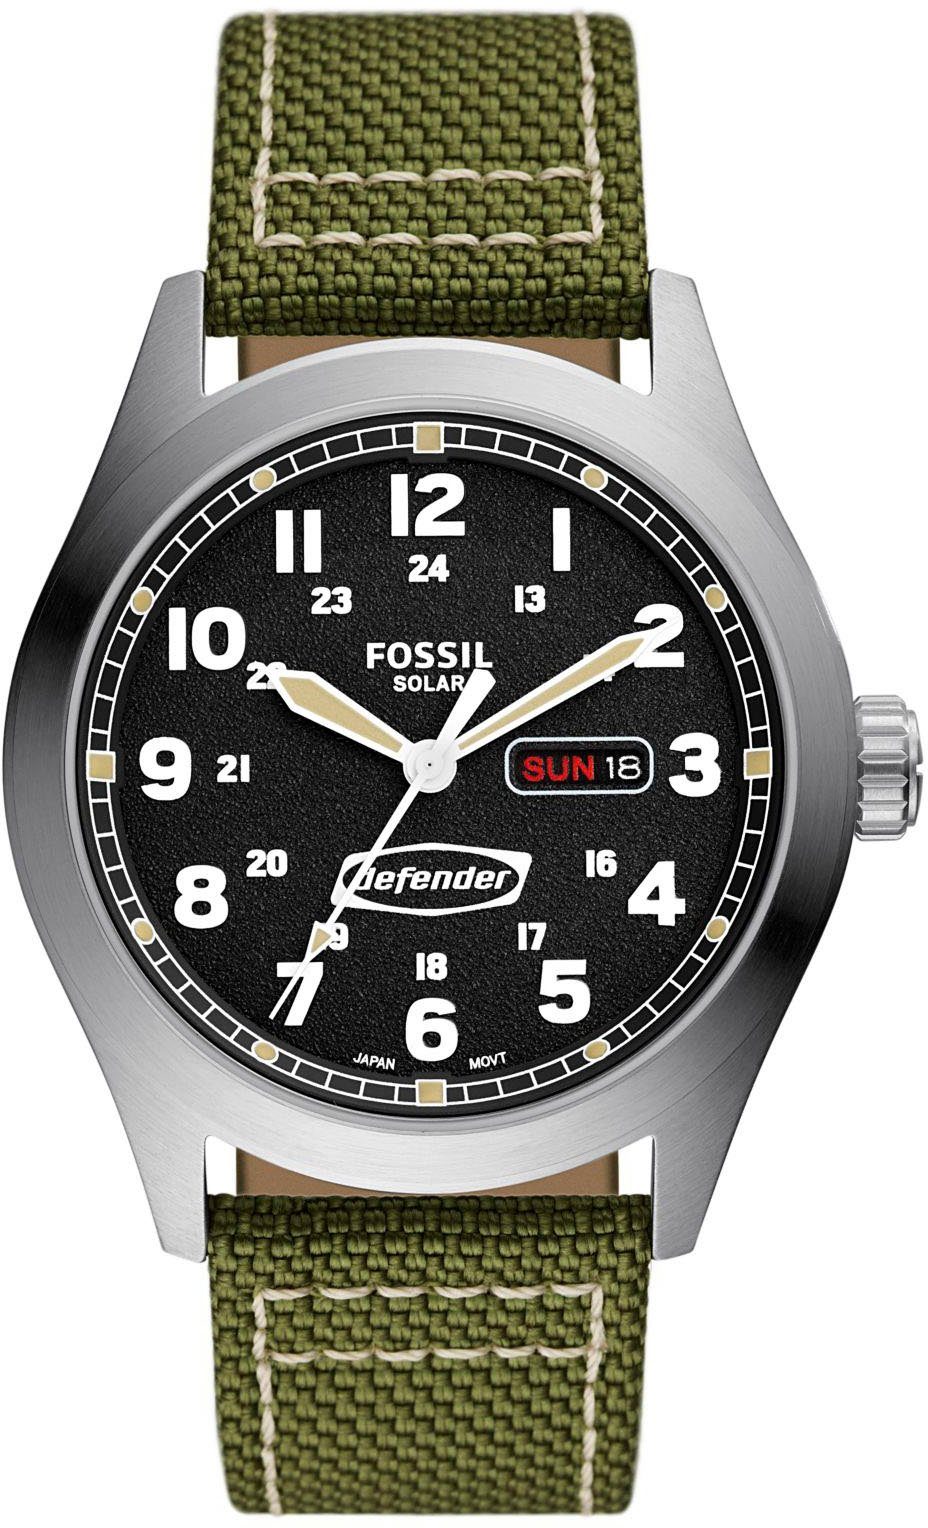 Fossil Solaruhr FS5977, edition limited DEFENDER